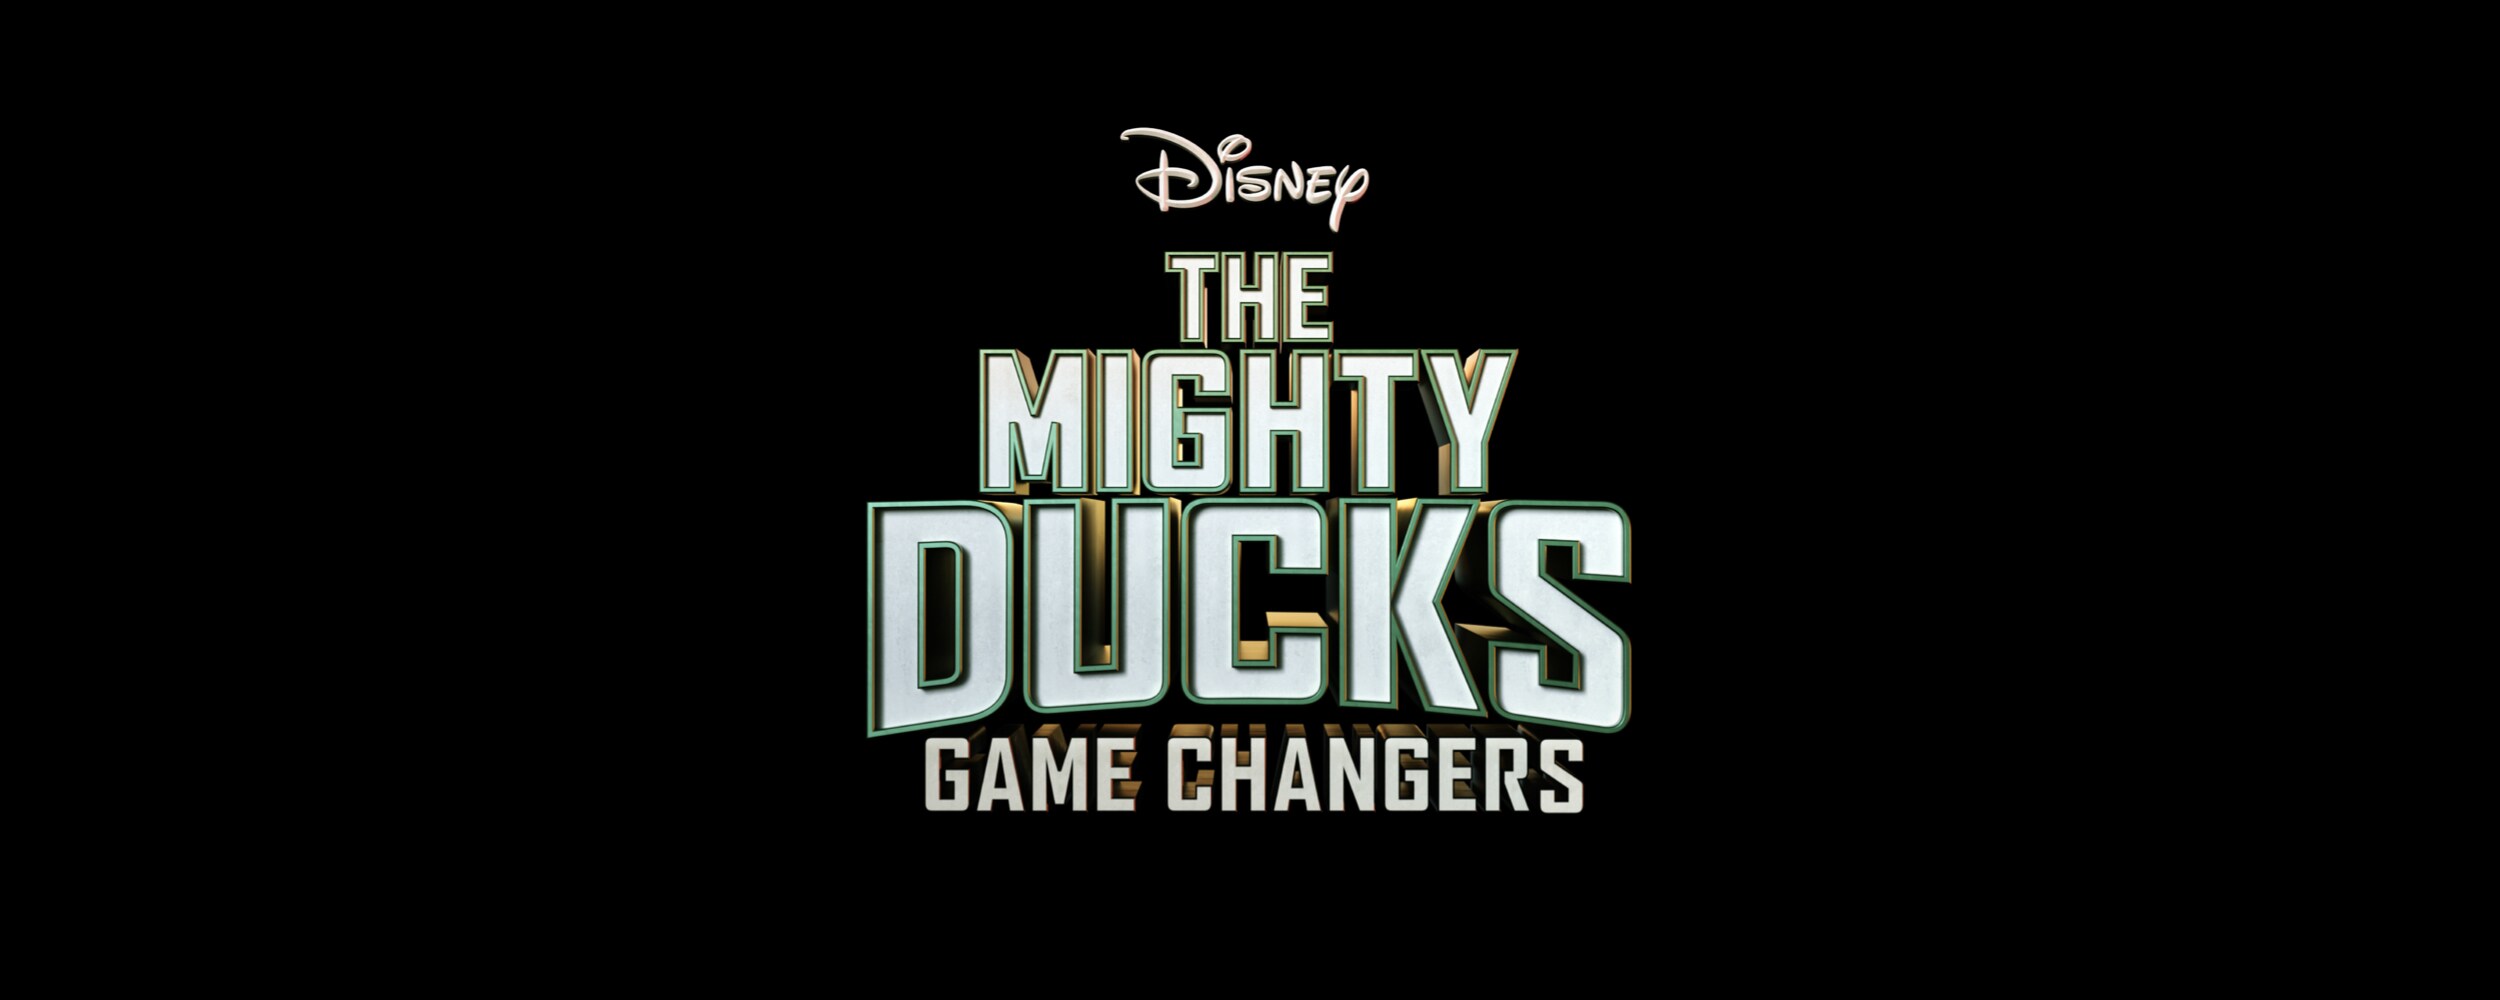 The Mighty Ducks: Game Changers' Reveals The Return Of Some Original  Franchise Ducks